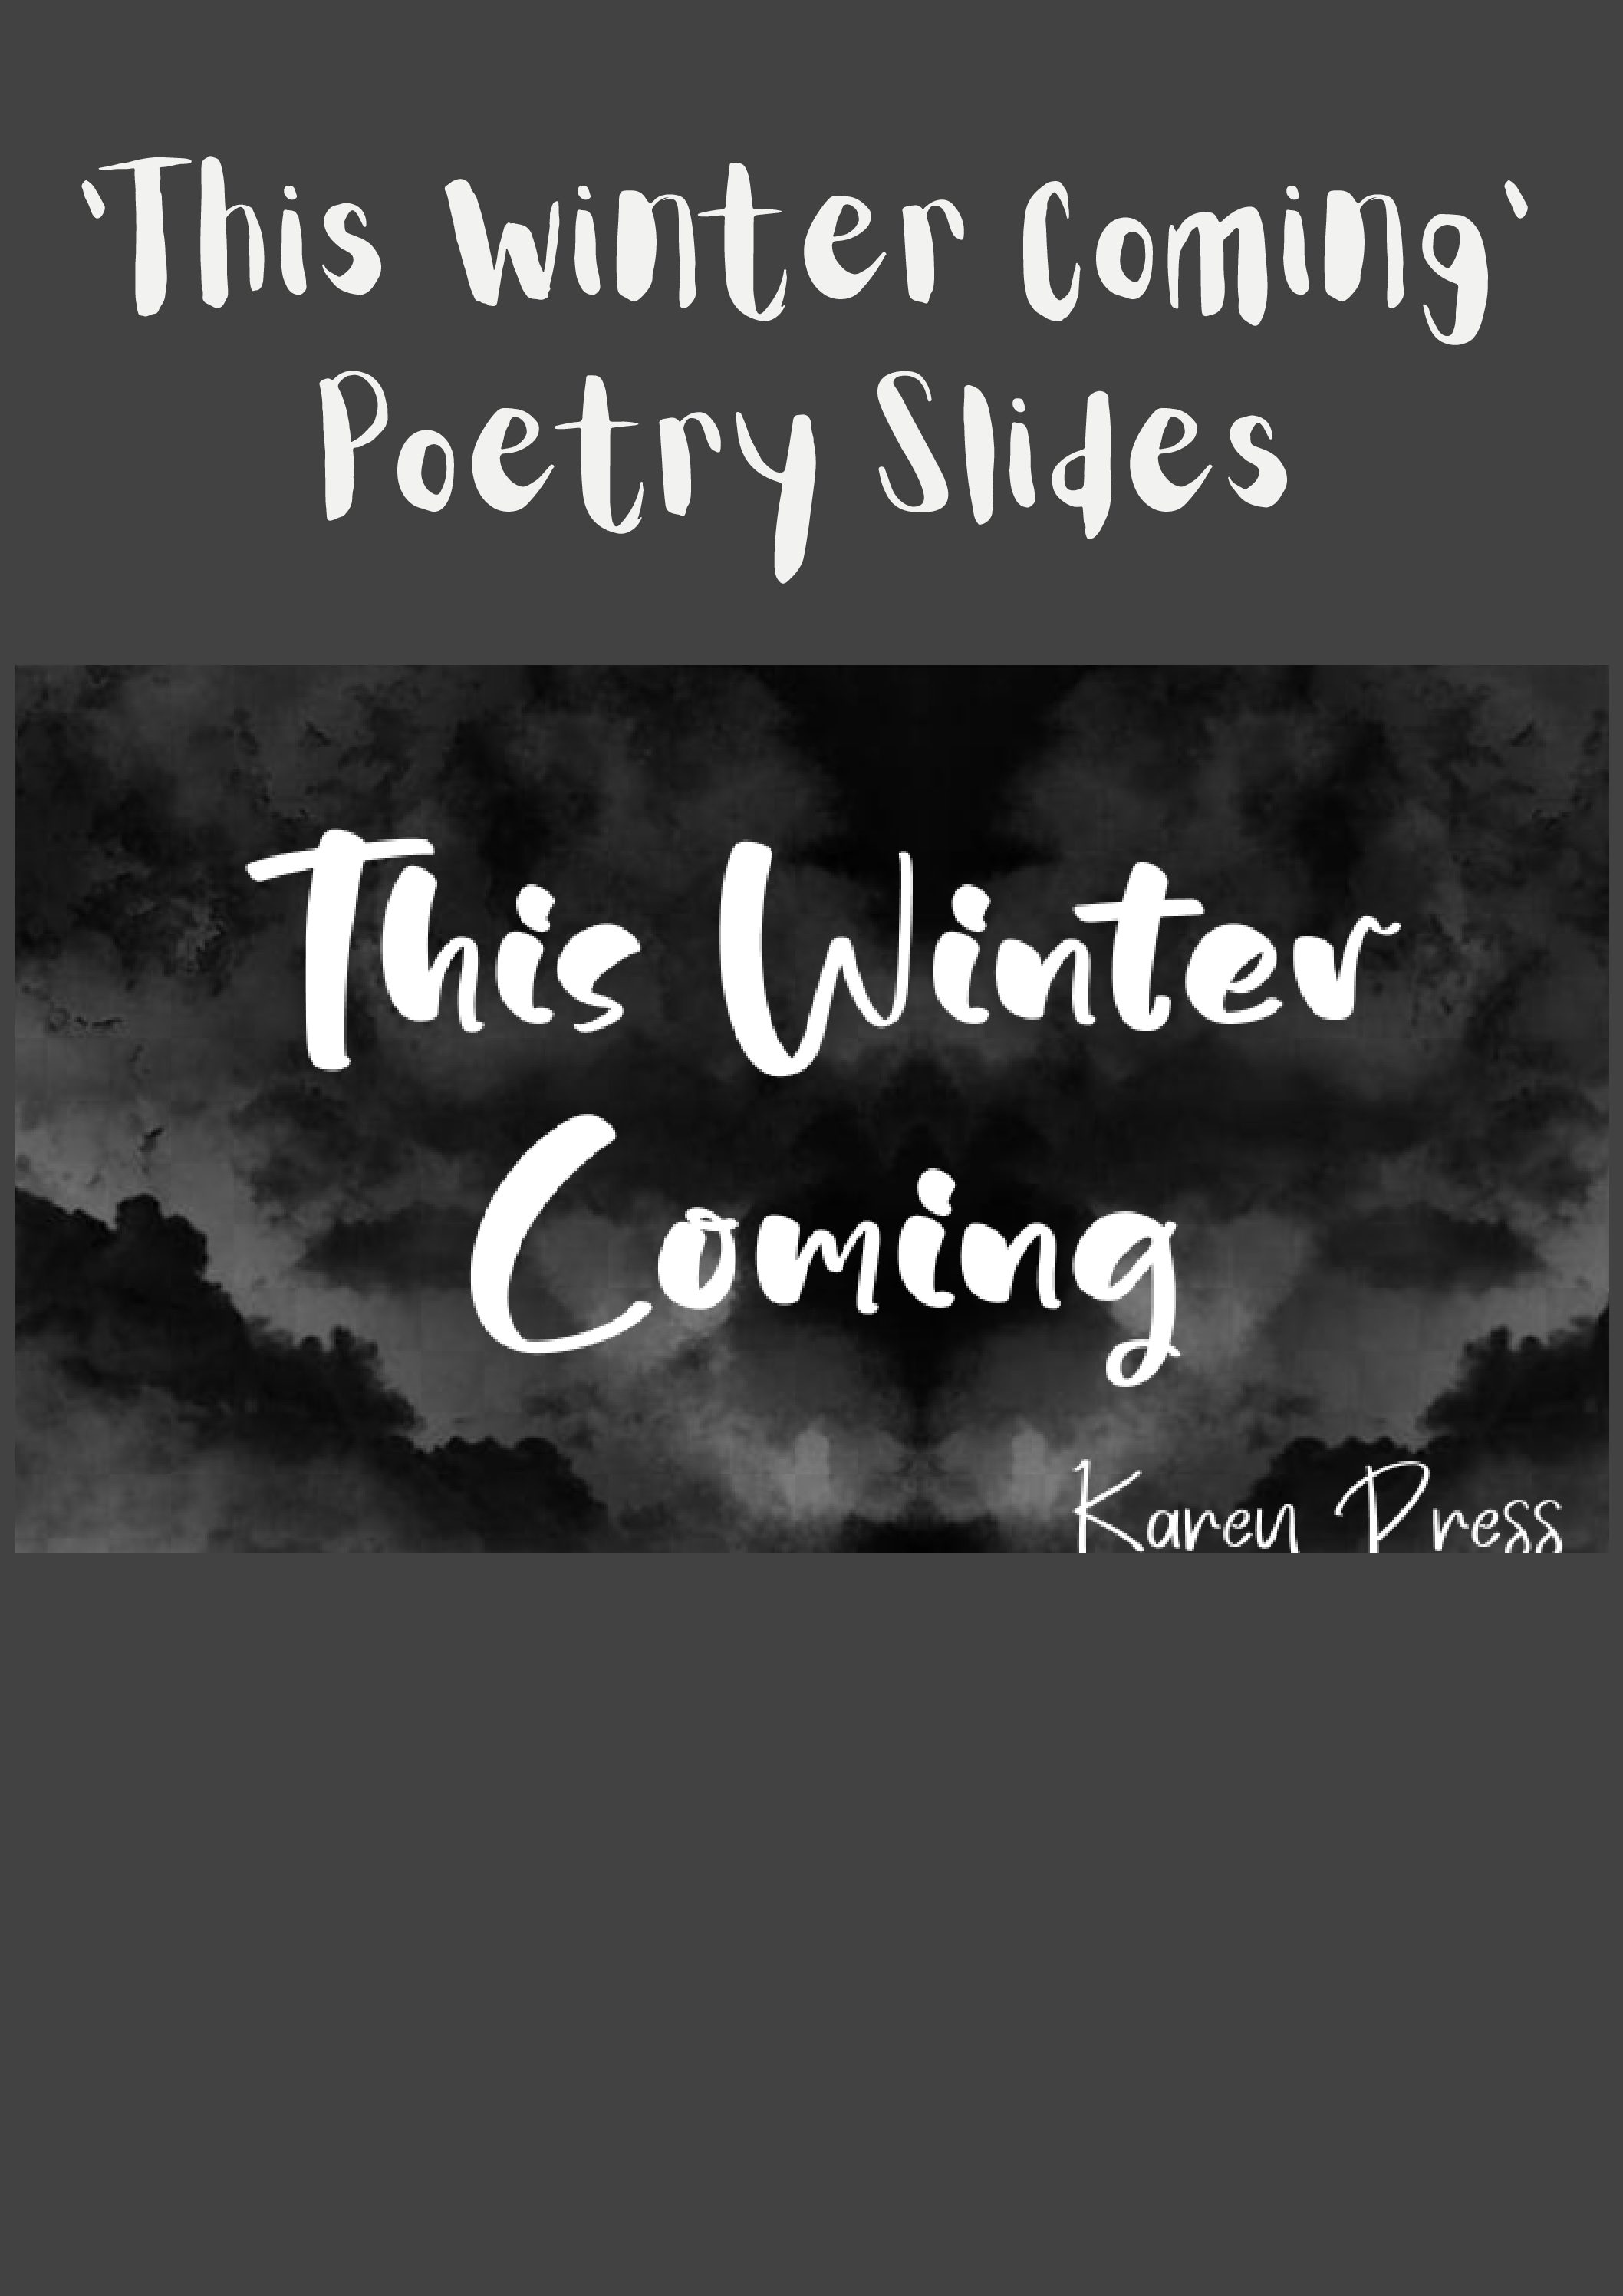 poetry essay on this winter coming